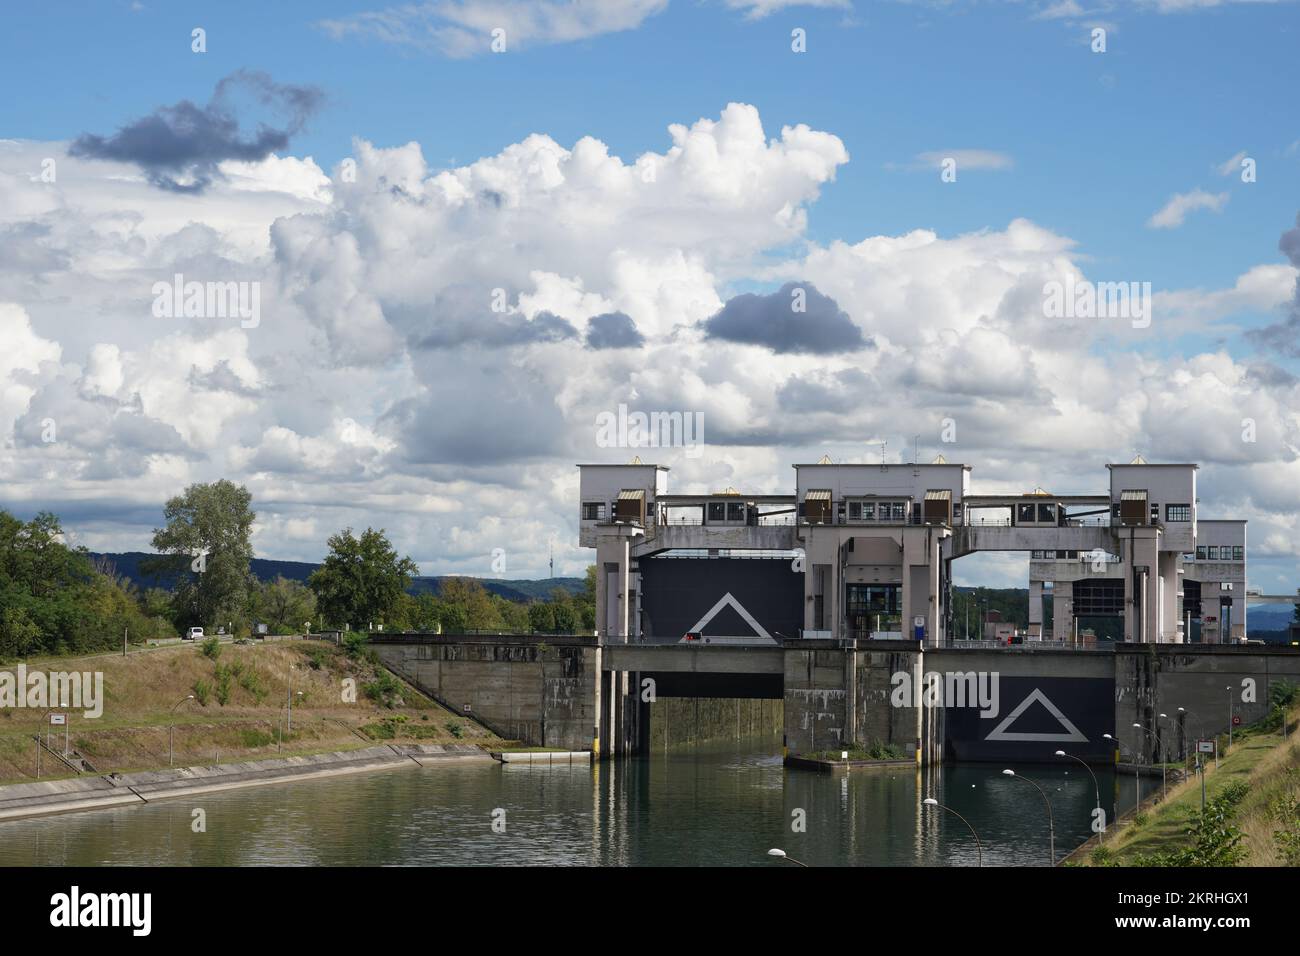 View on  two locks with open one gate situated next to hydroelectric power station Kembs on the river Rhine. Stock Photo